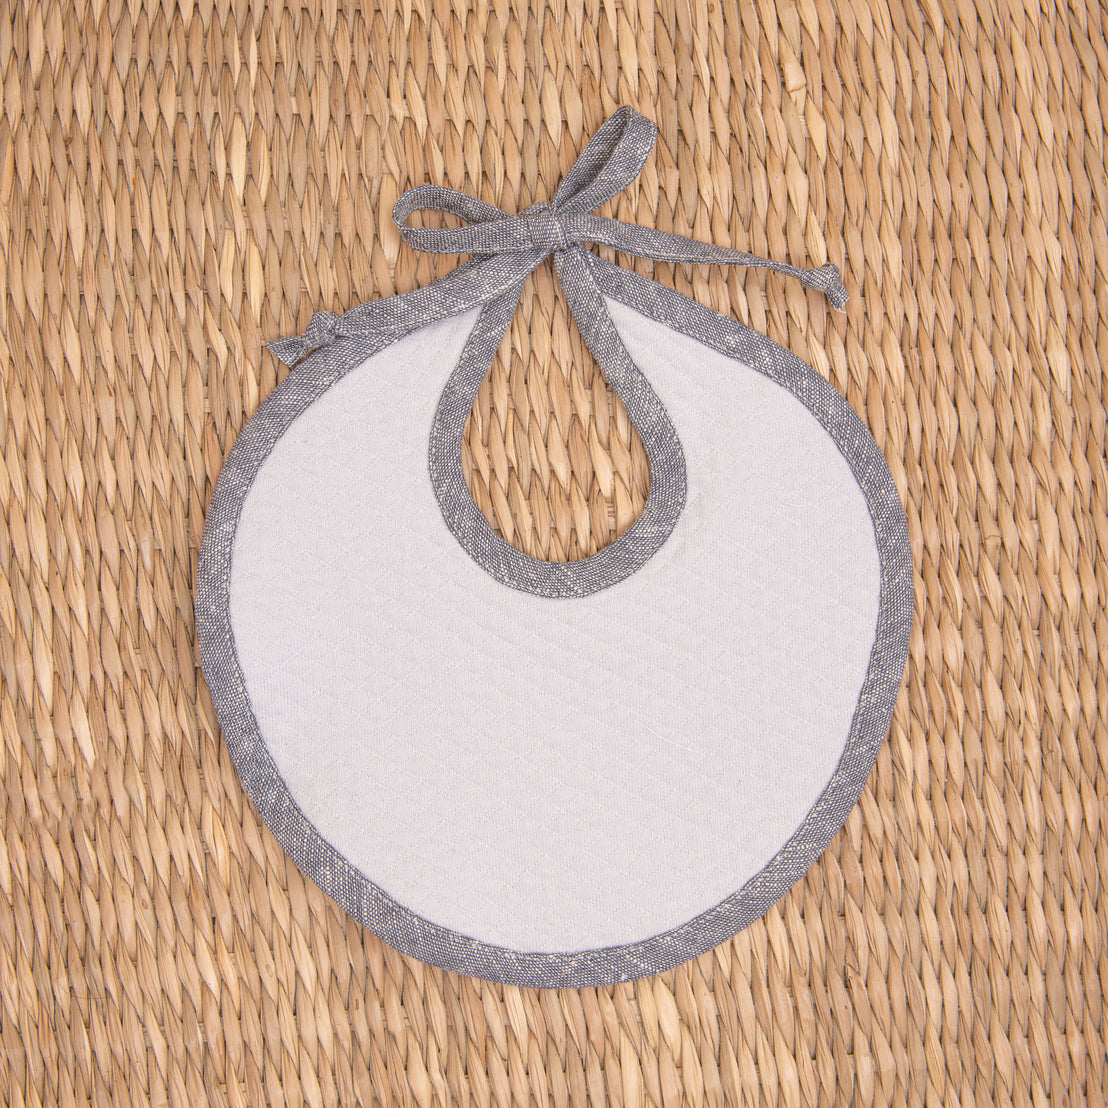 Flat lay photo of the blue Silas Linen Trim Bib. The bib is made from textured cotton in light grey